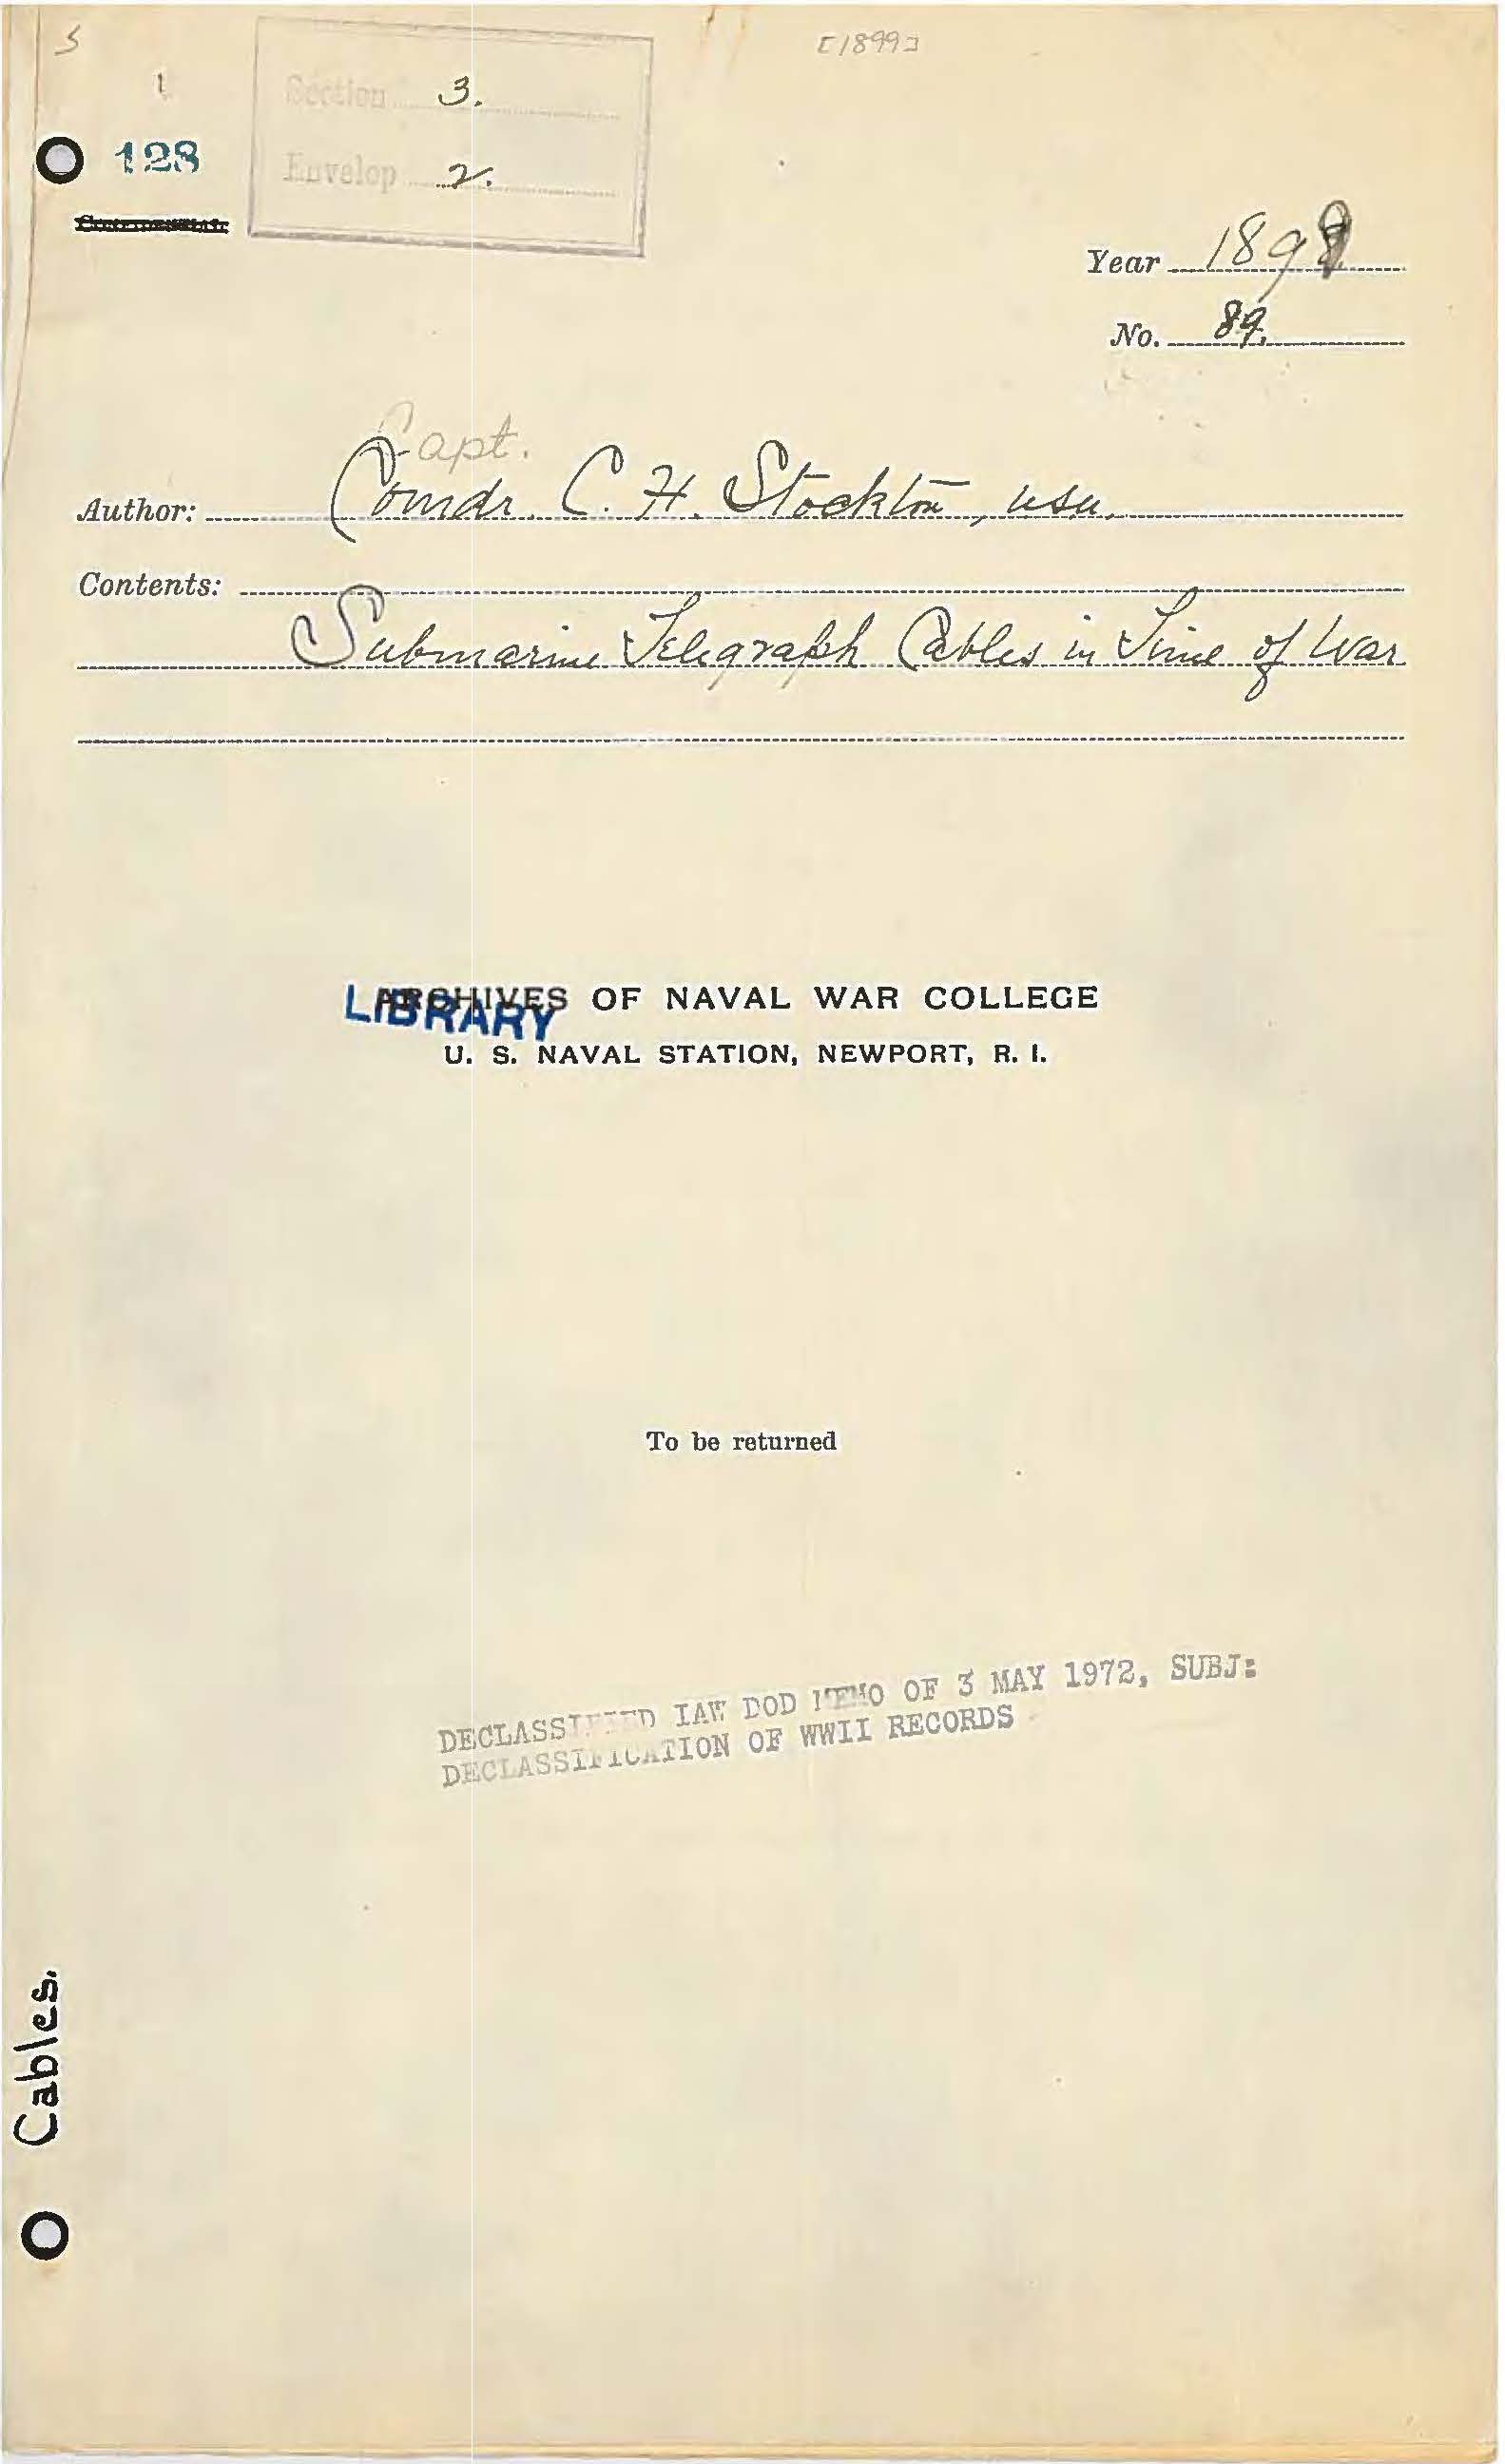 Submarine Telegraph Cables in Time of War, Charles H. Stockton